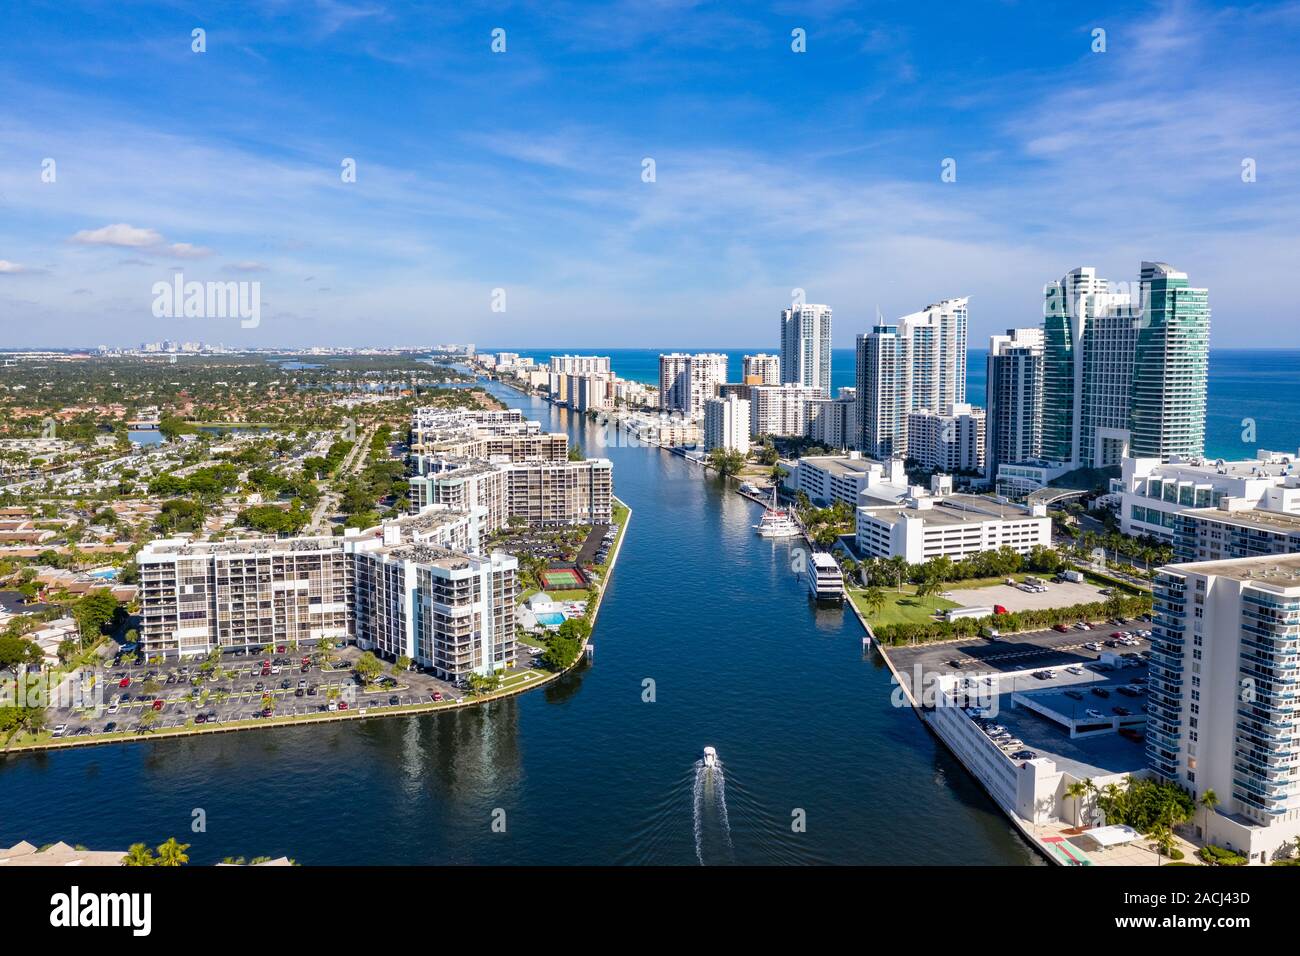 Aerial view of Fort Lauderdale, Florida Stock Photo